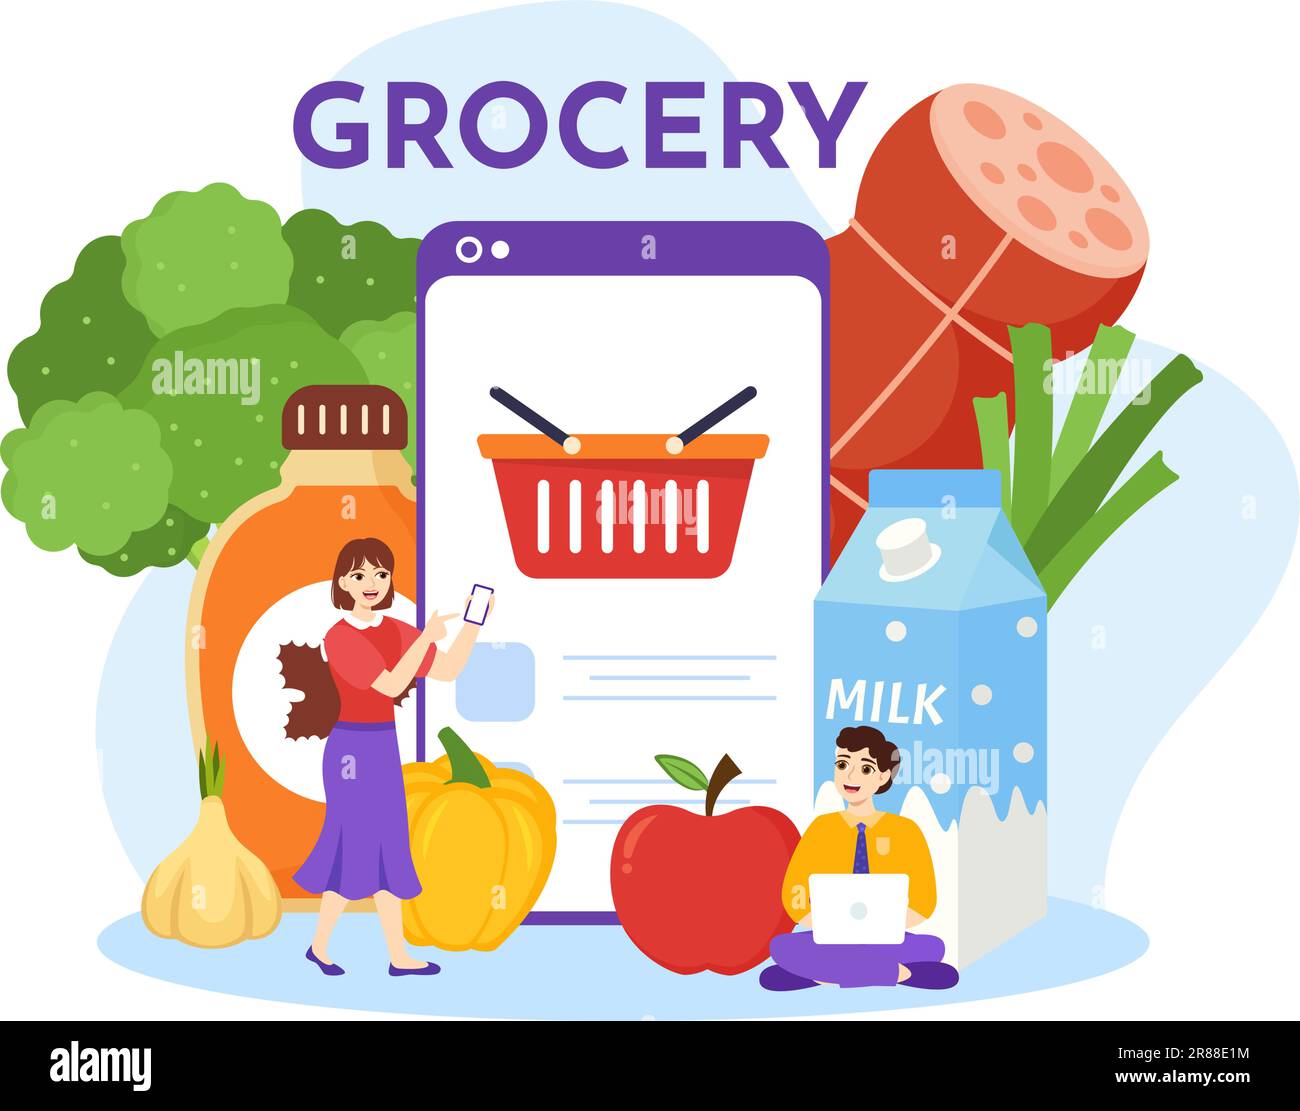 Food Grocery Store Shopping Vector Illustration with Foods Items and ...